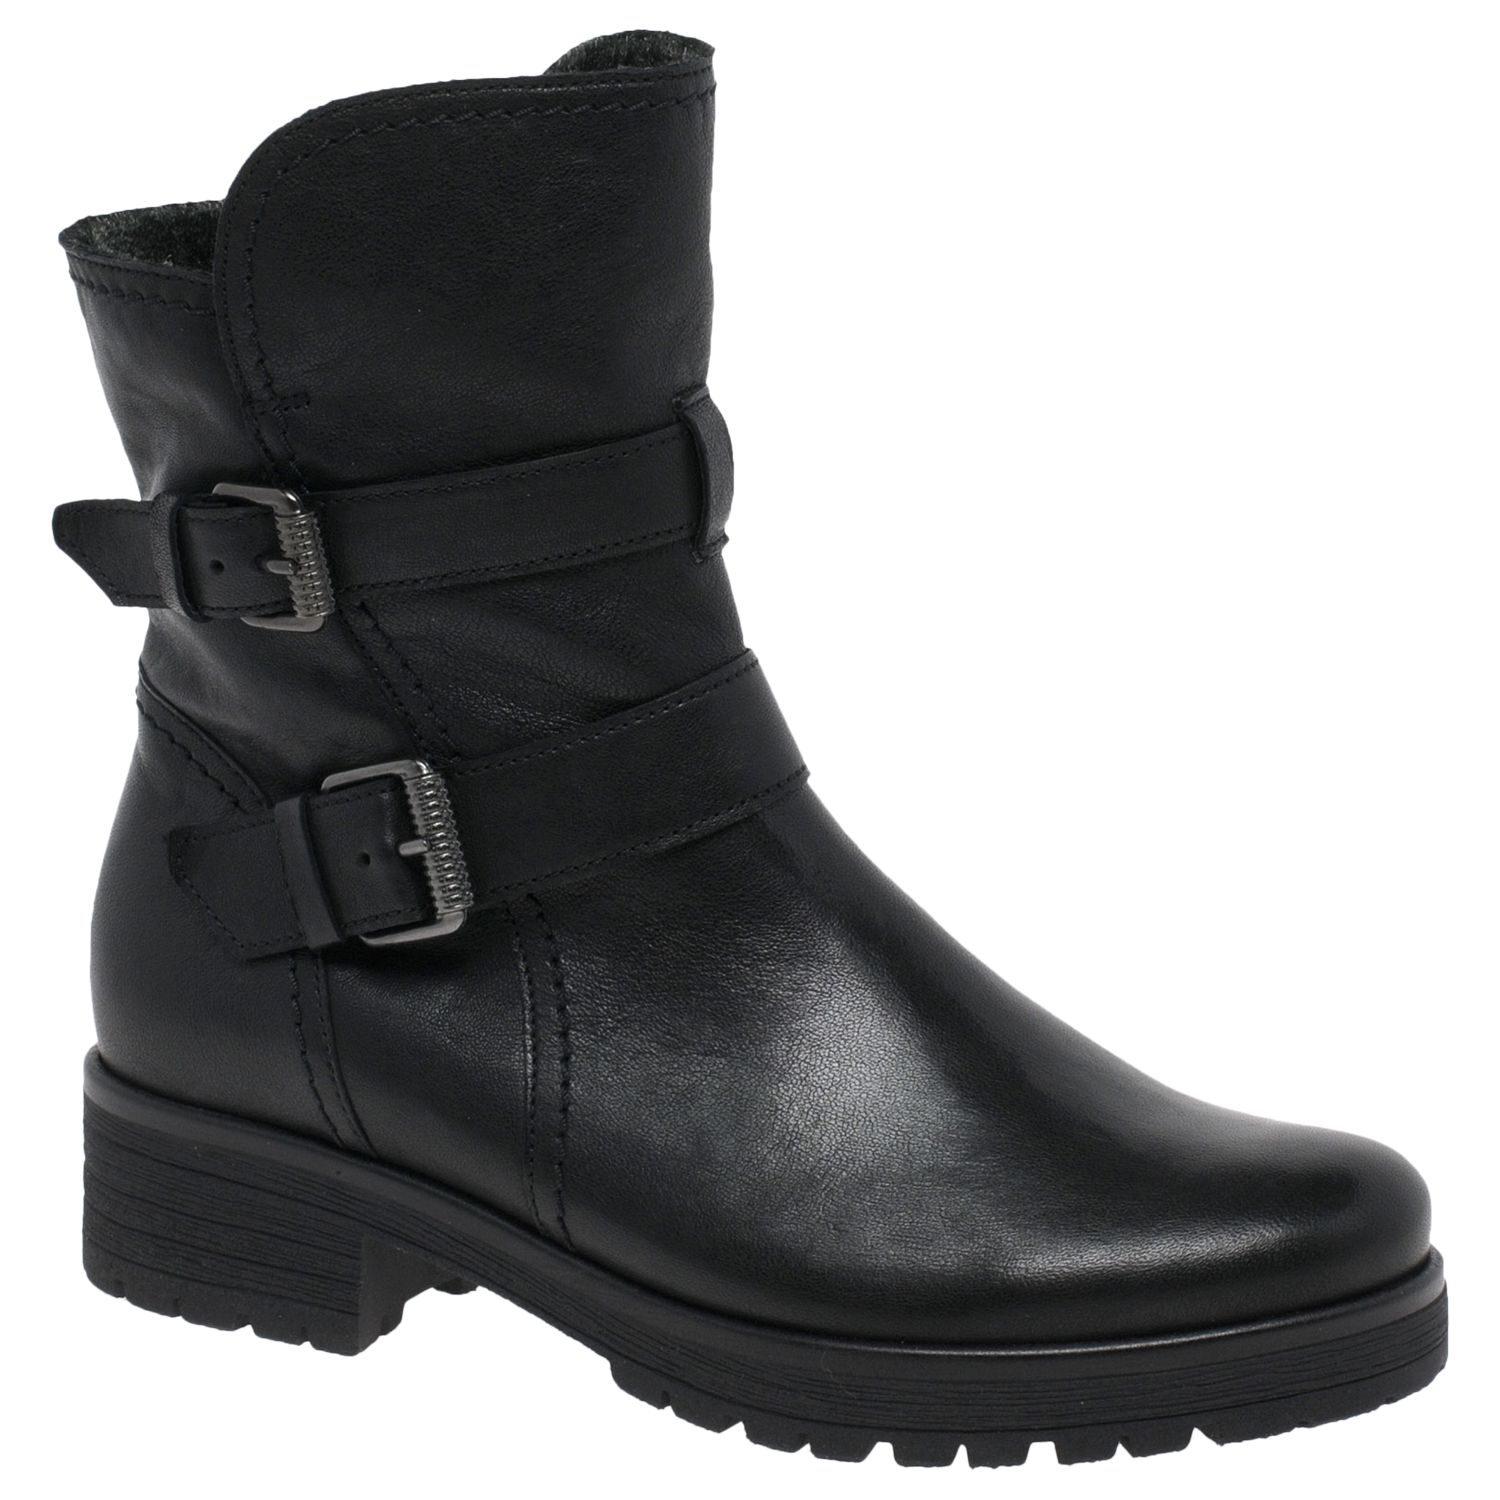 Gabor Shiraz Wide Fit Boots, Black Leather at John Lewis & Partners